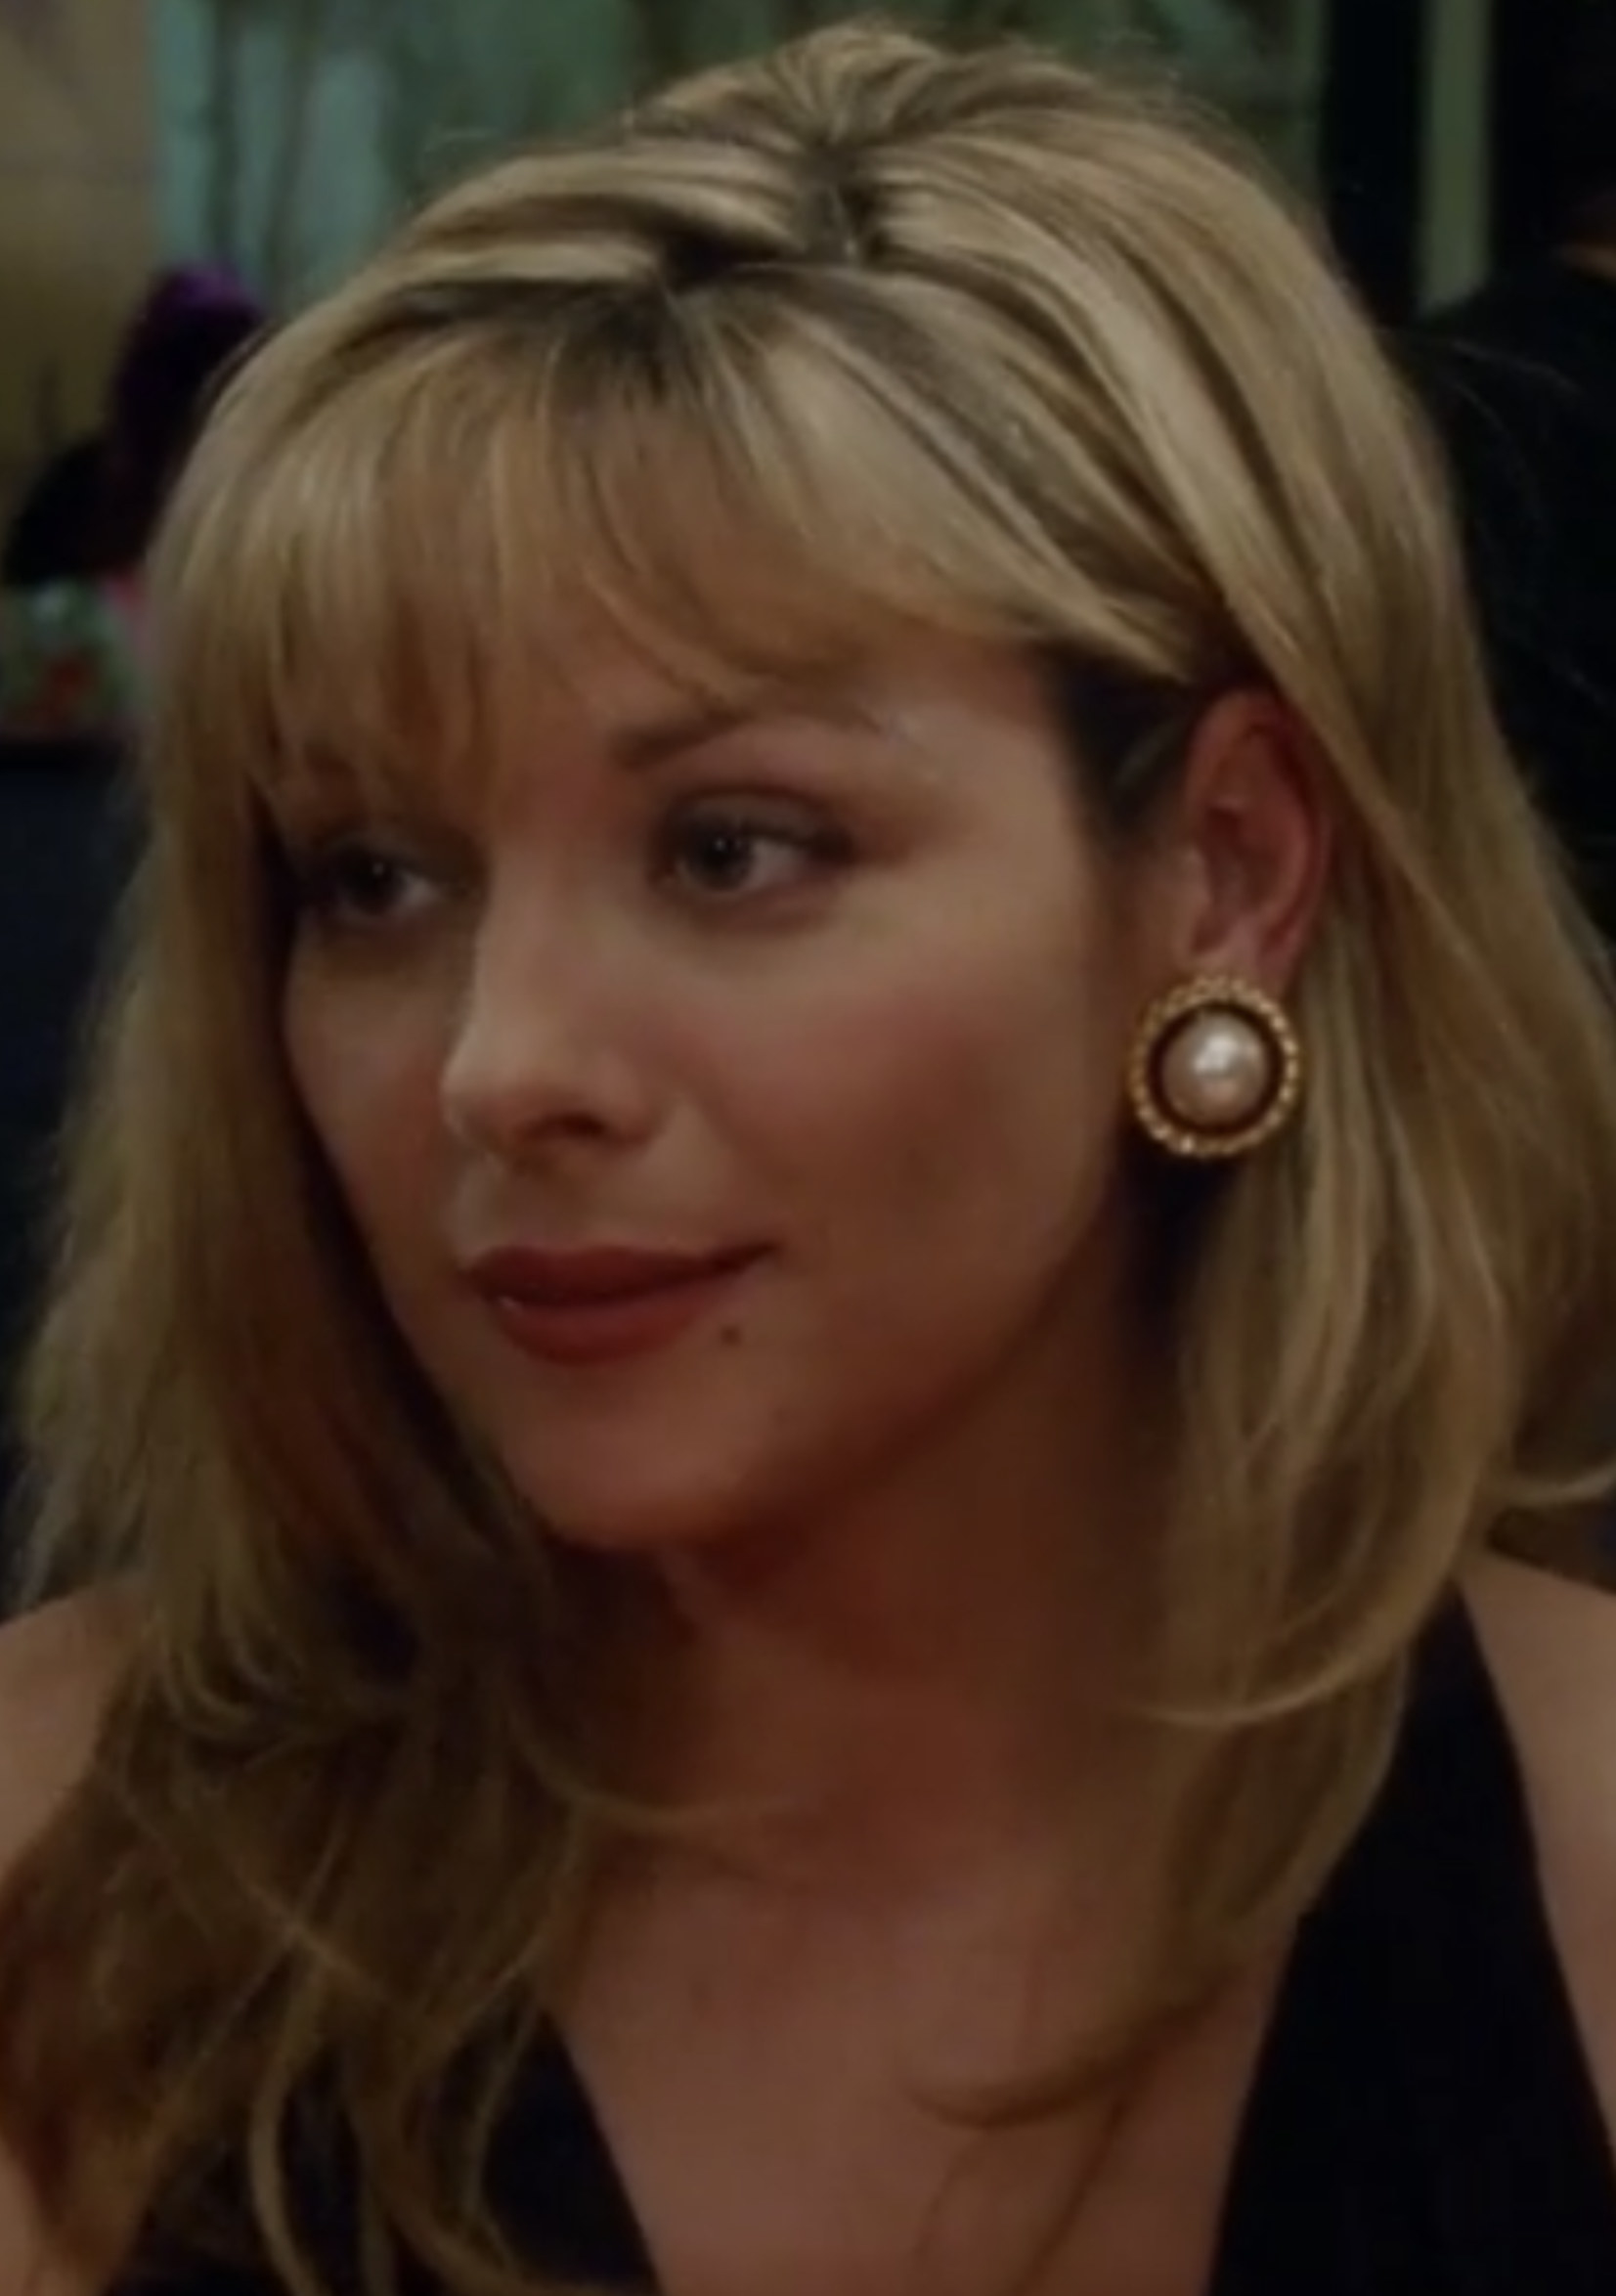 Cattrall wearing a black dress and lipstick in the pilot episode